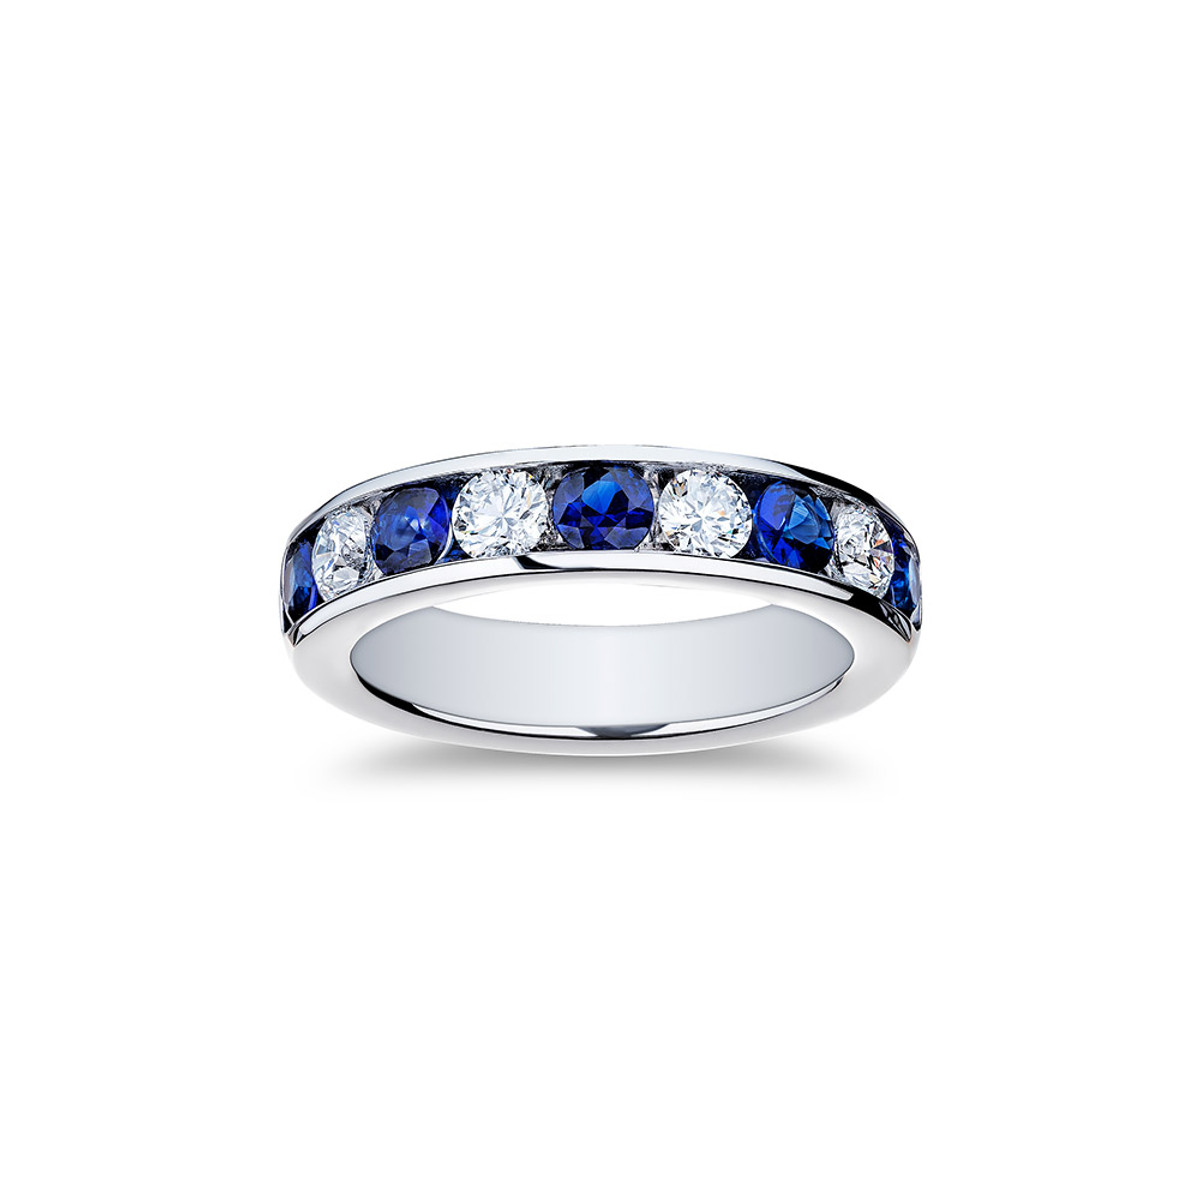 18KW DIAMOND AND SAPPHIRE BAND 4RB=0.64CTTW 5SAPPHIRE=0.95CTTW-43280 Product Image